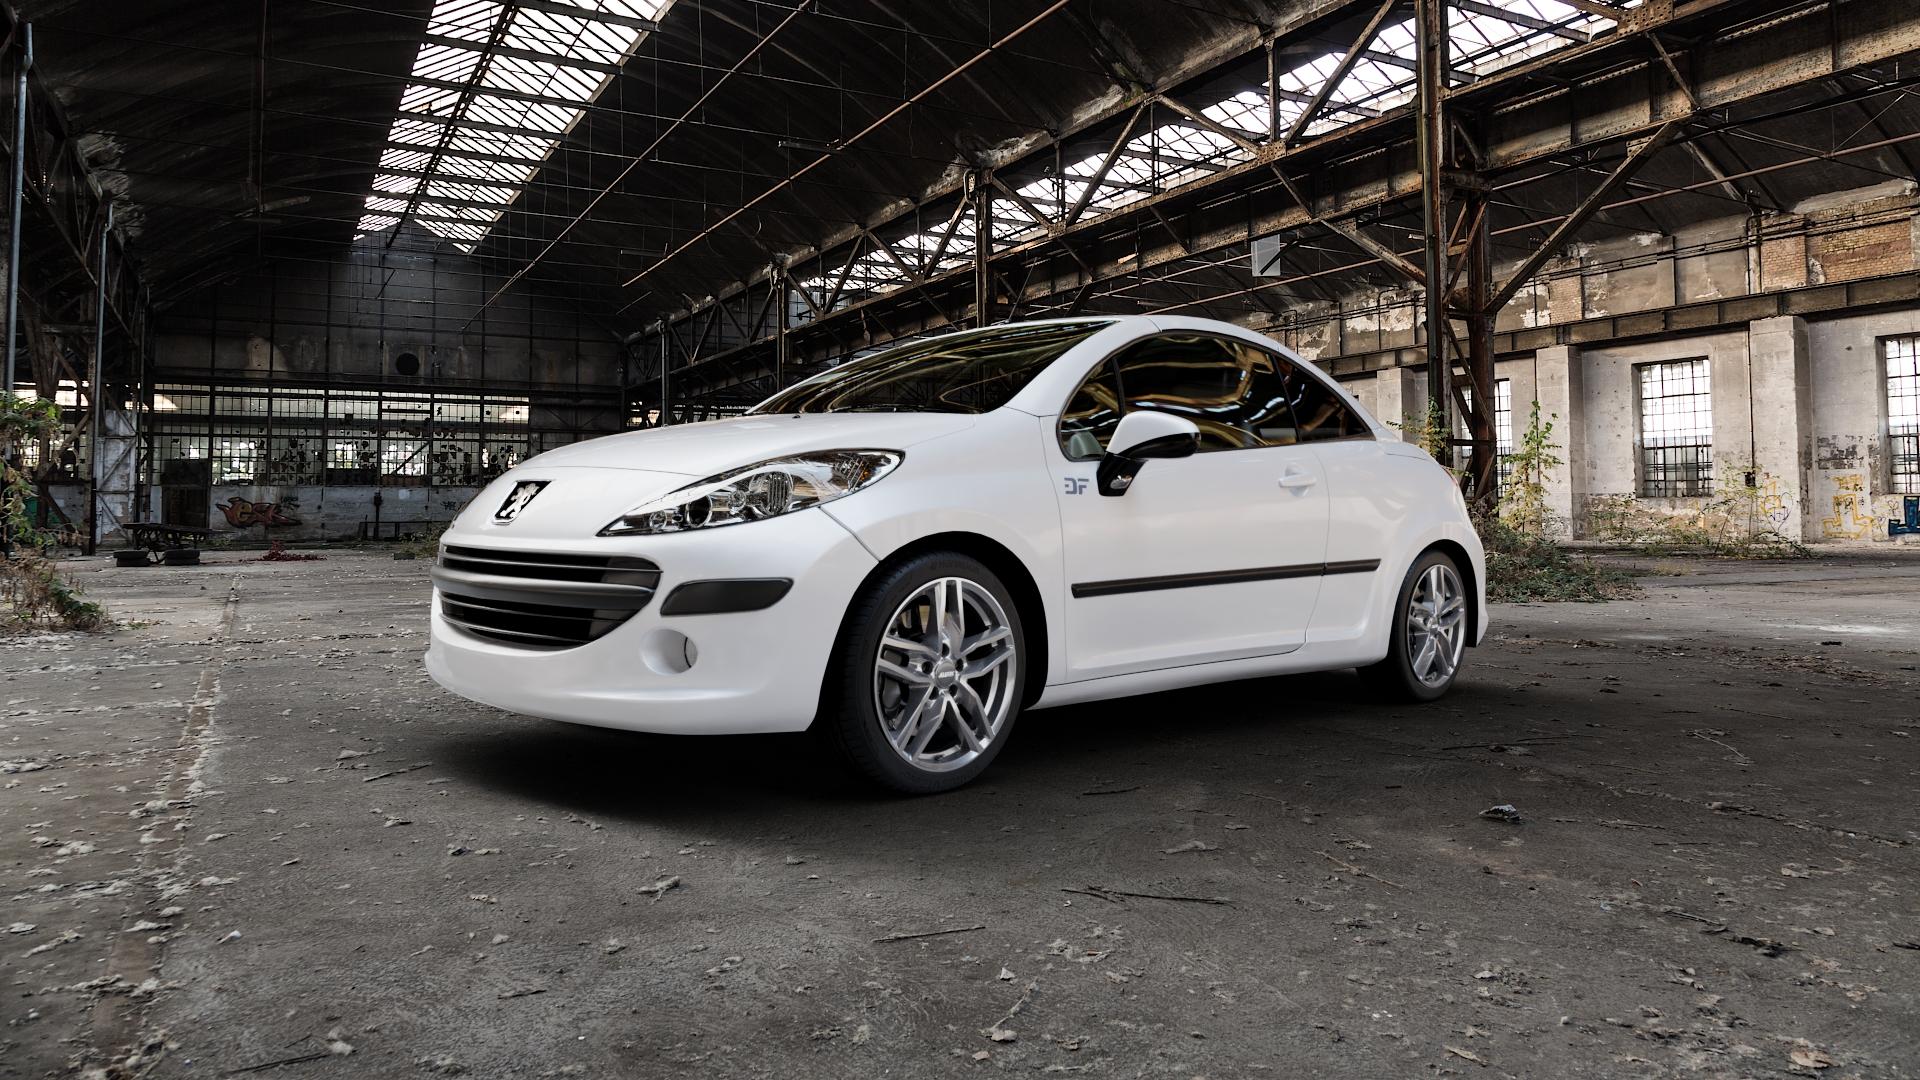 Peugeot 207 CC 1,6l 150 THP 110kW (150 hp) Wheels and Tyre Packages |  velonity.com